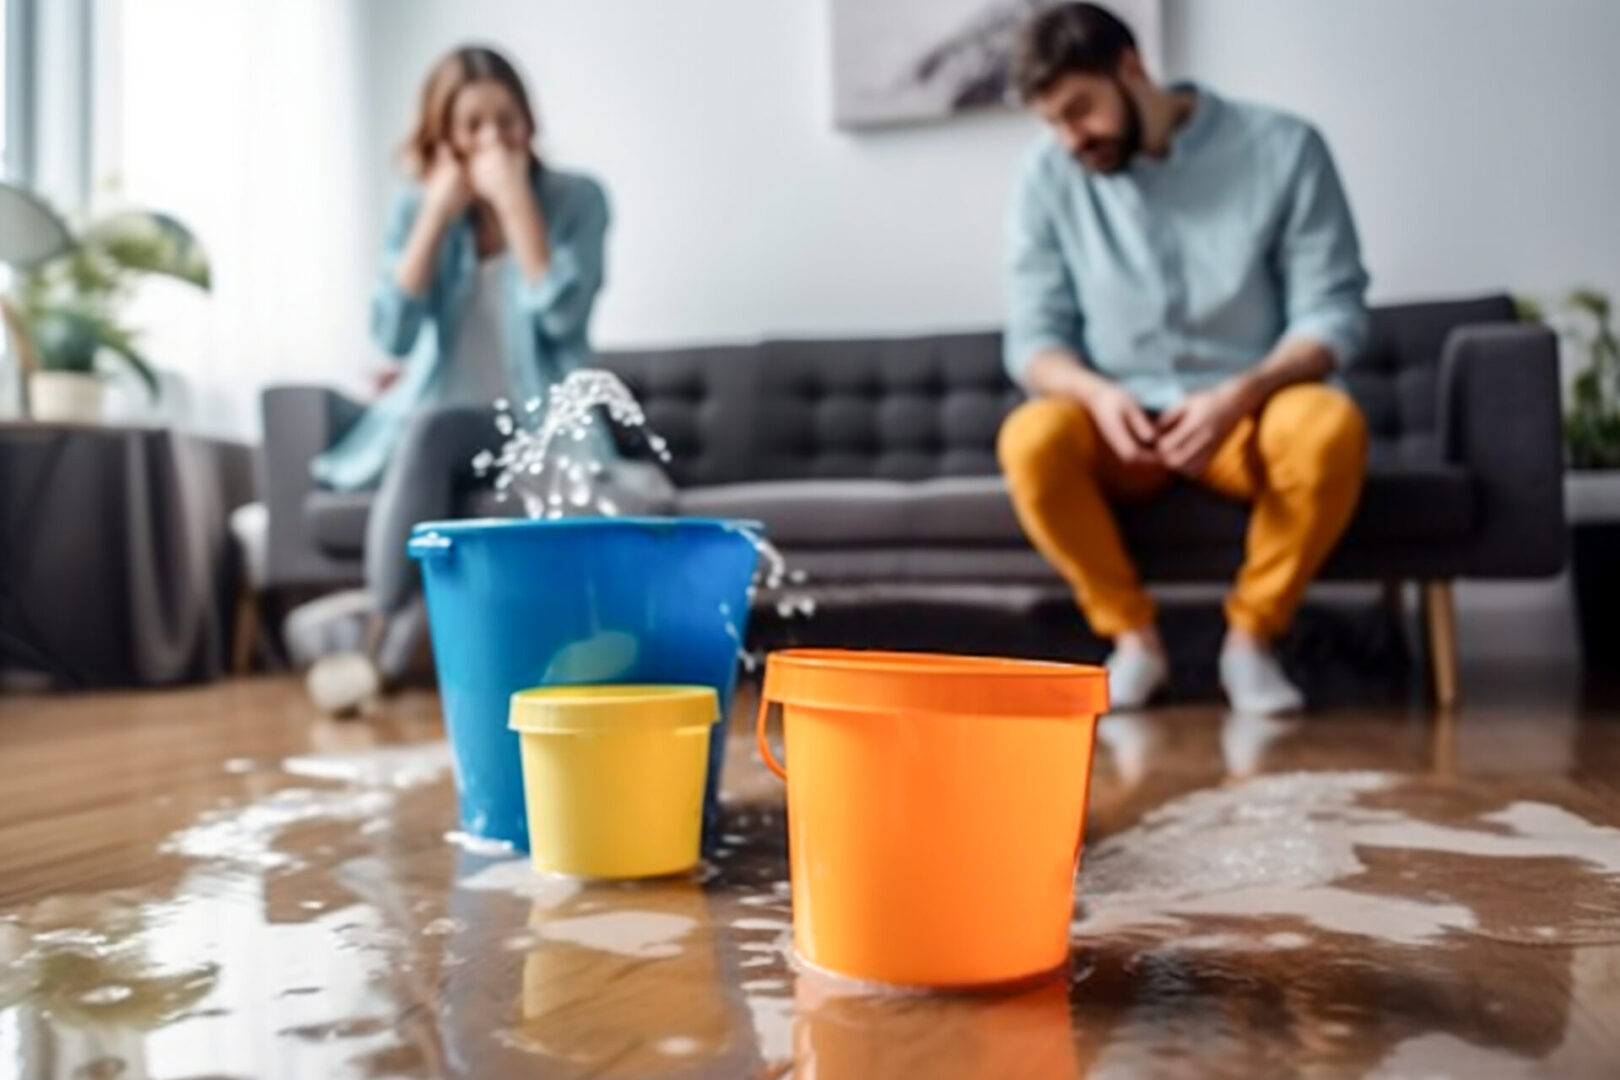 A couple sits on the couch (woman on the left, man on the right) as they watch water leaking from the roof into overflowing buckets on the floor.